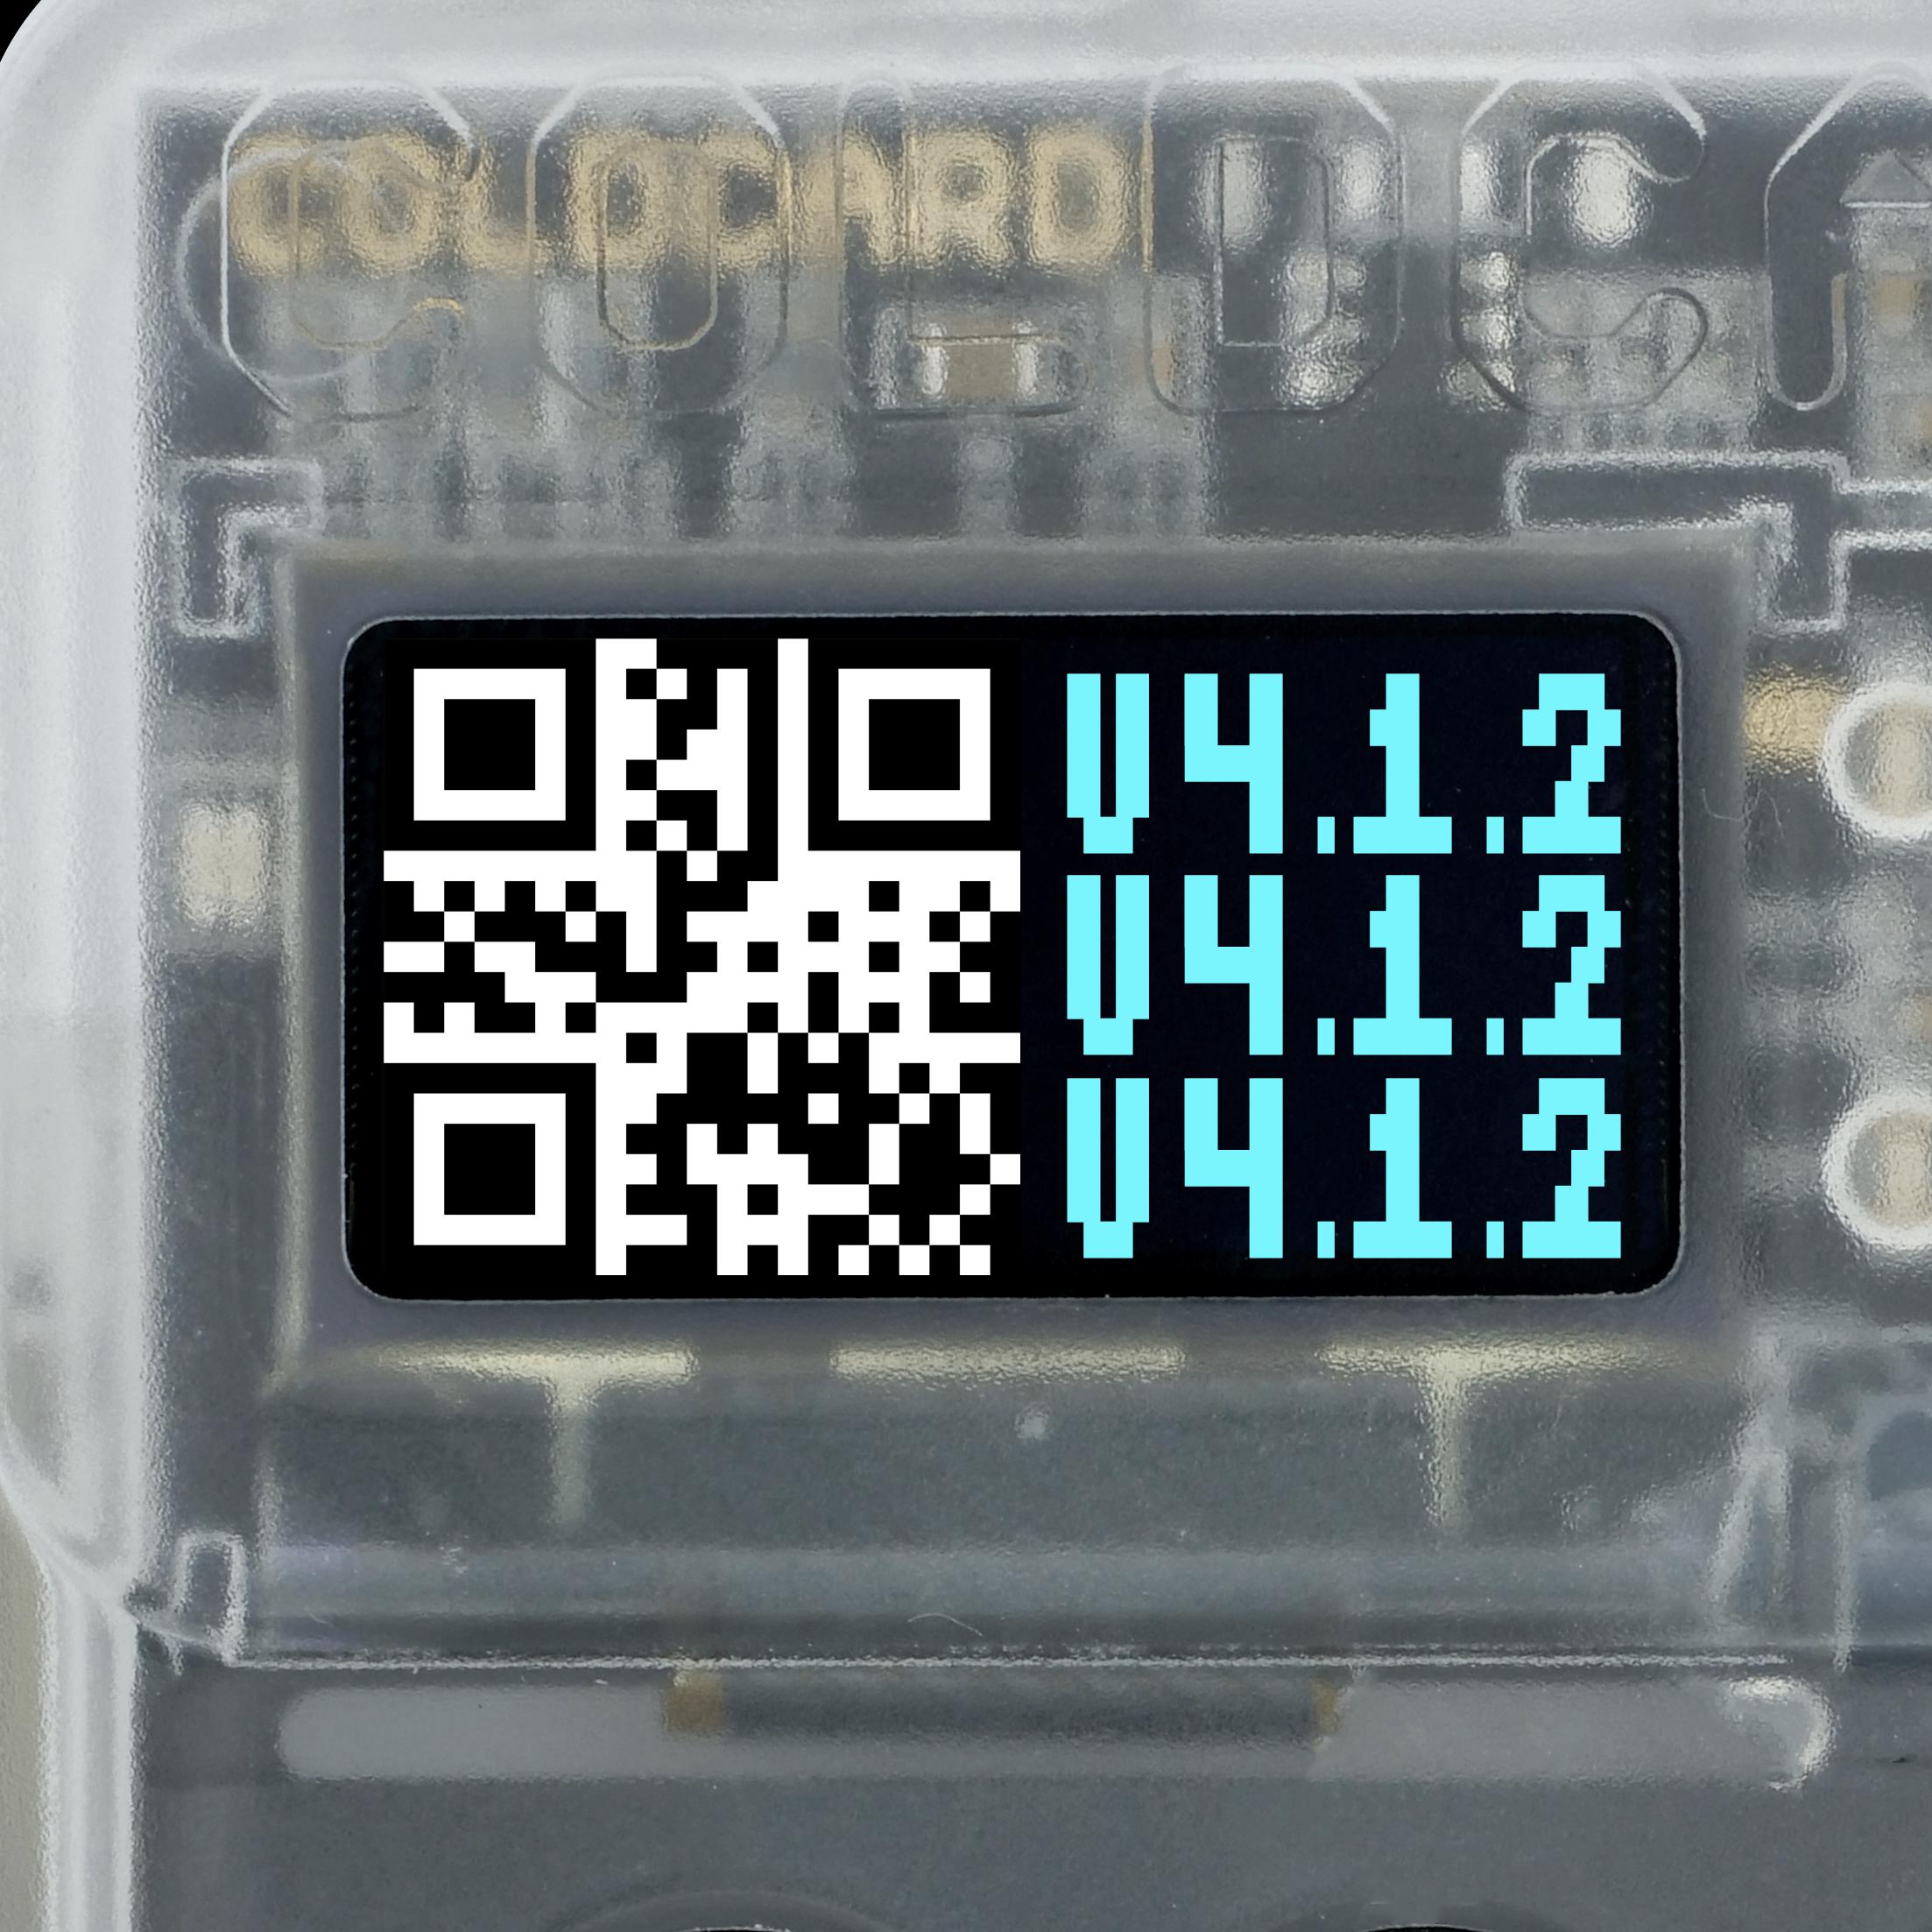 Version 4.1.2 Released (More QR Codes)